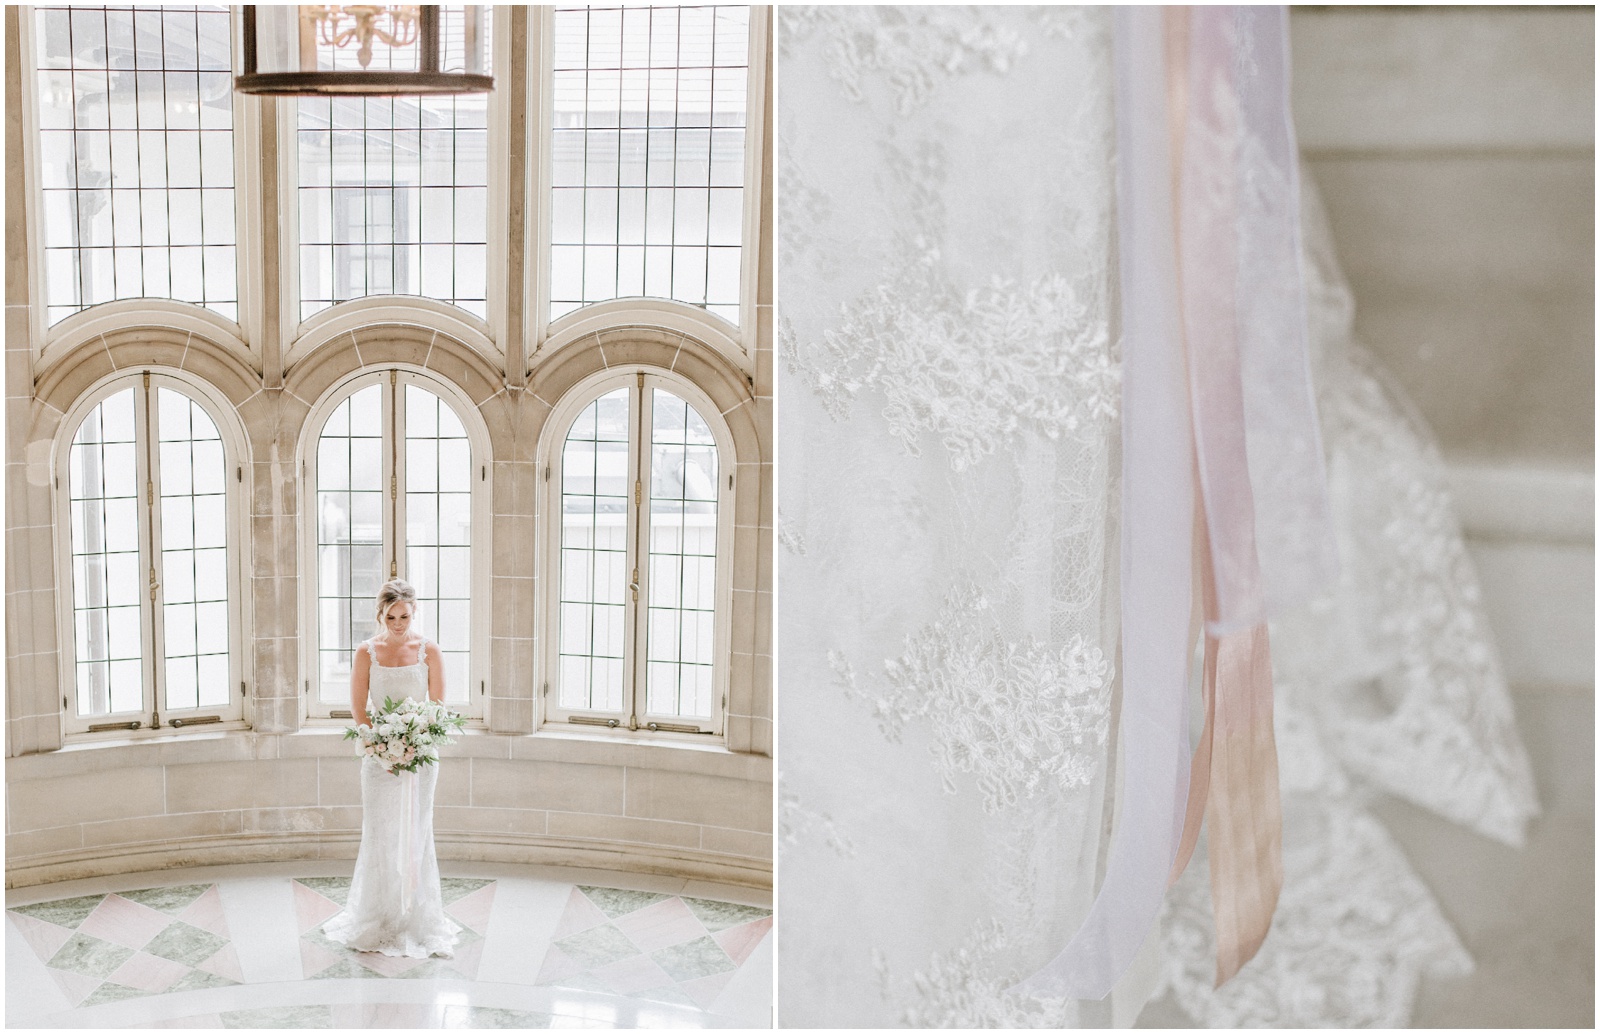 Bride in lace dress in front of large windows